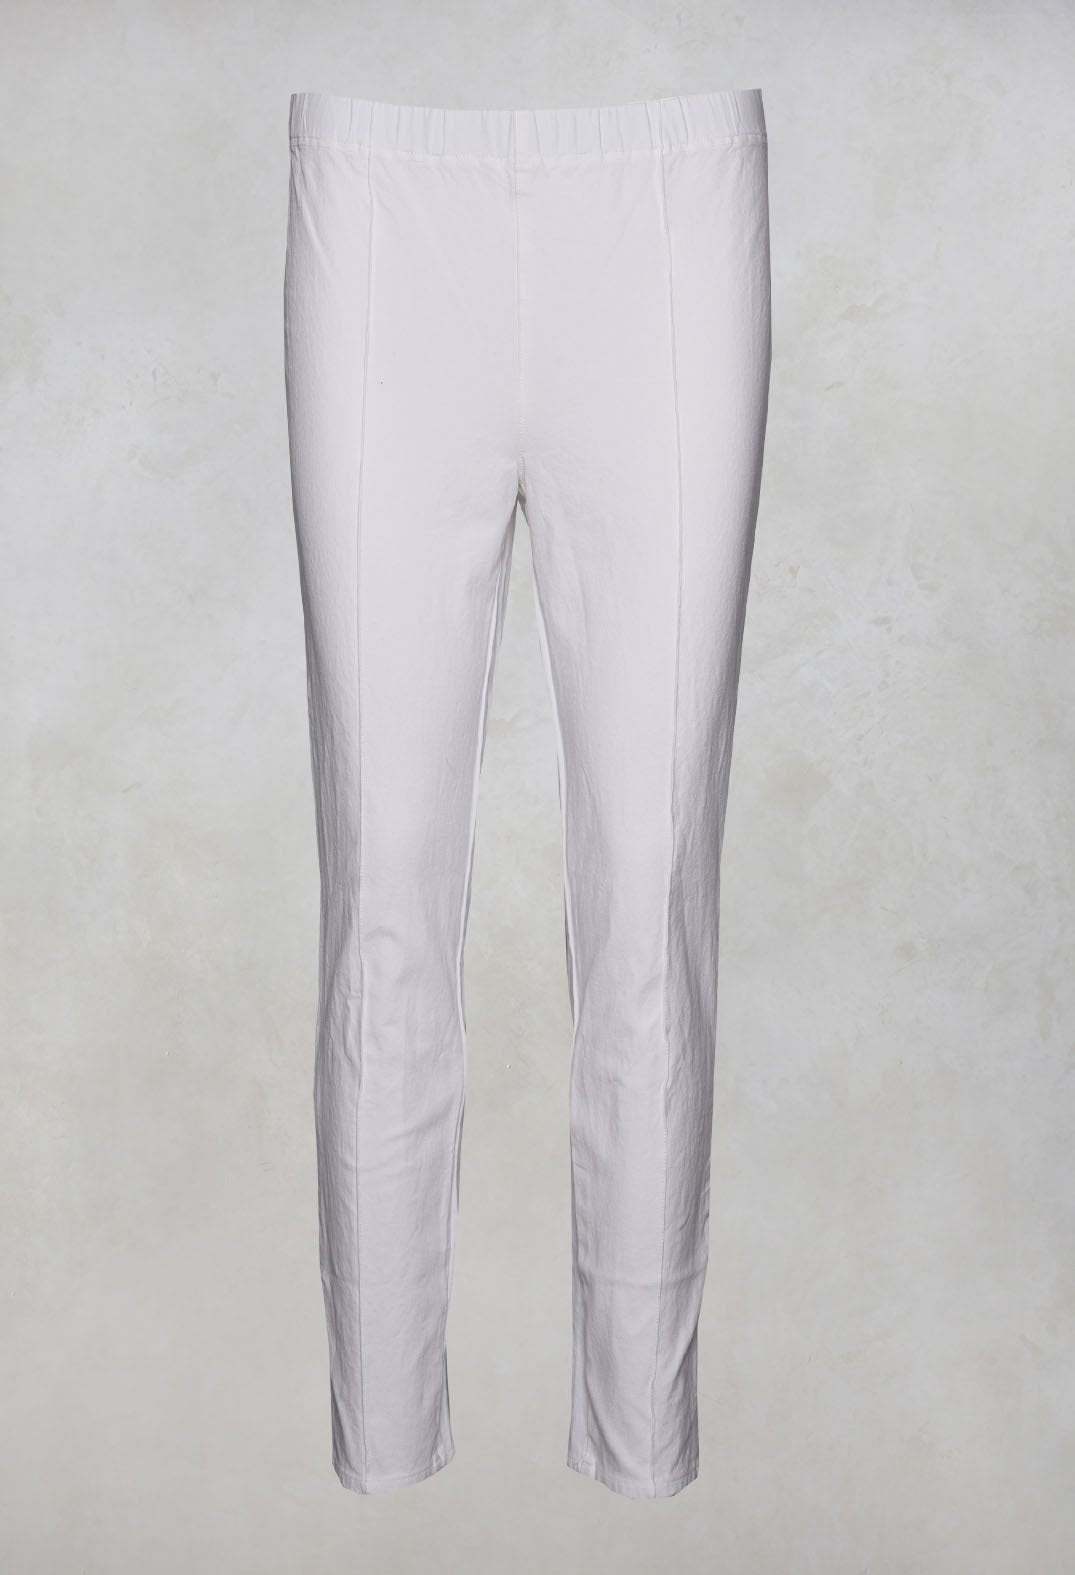 Paderbote Skinny Leg Trousers in Schnee White